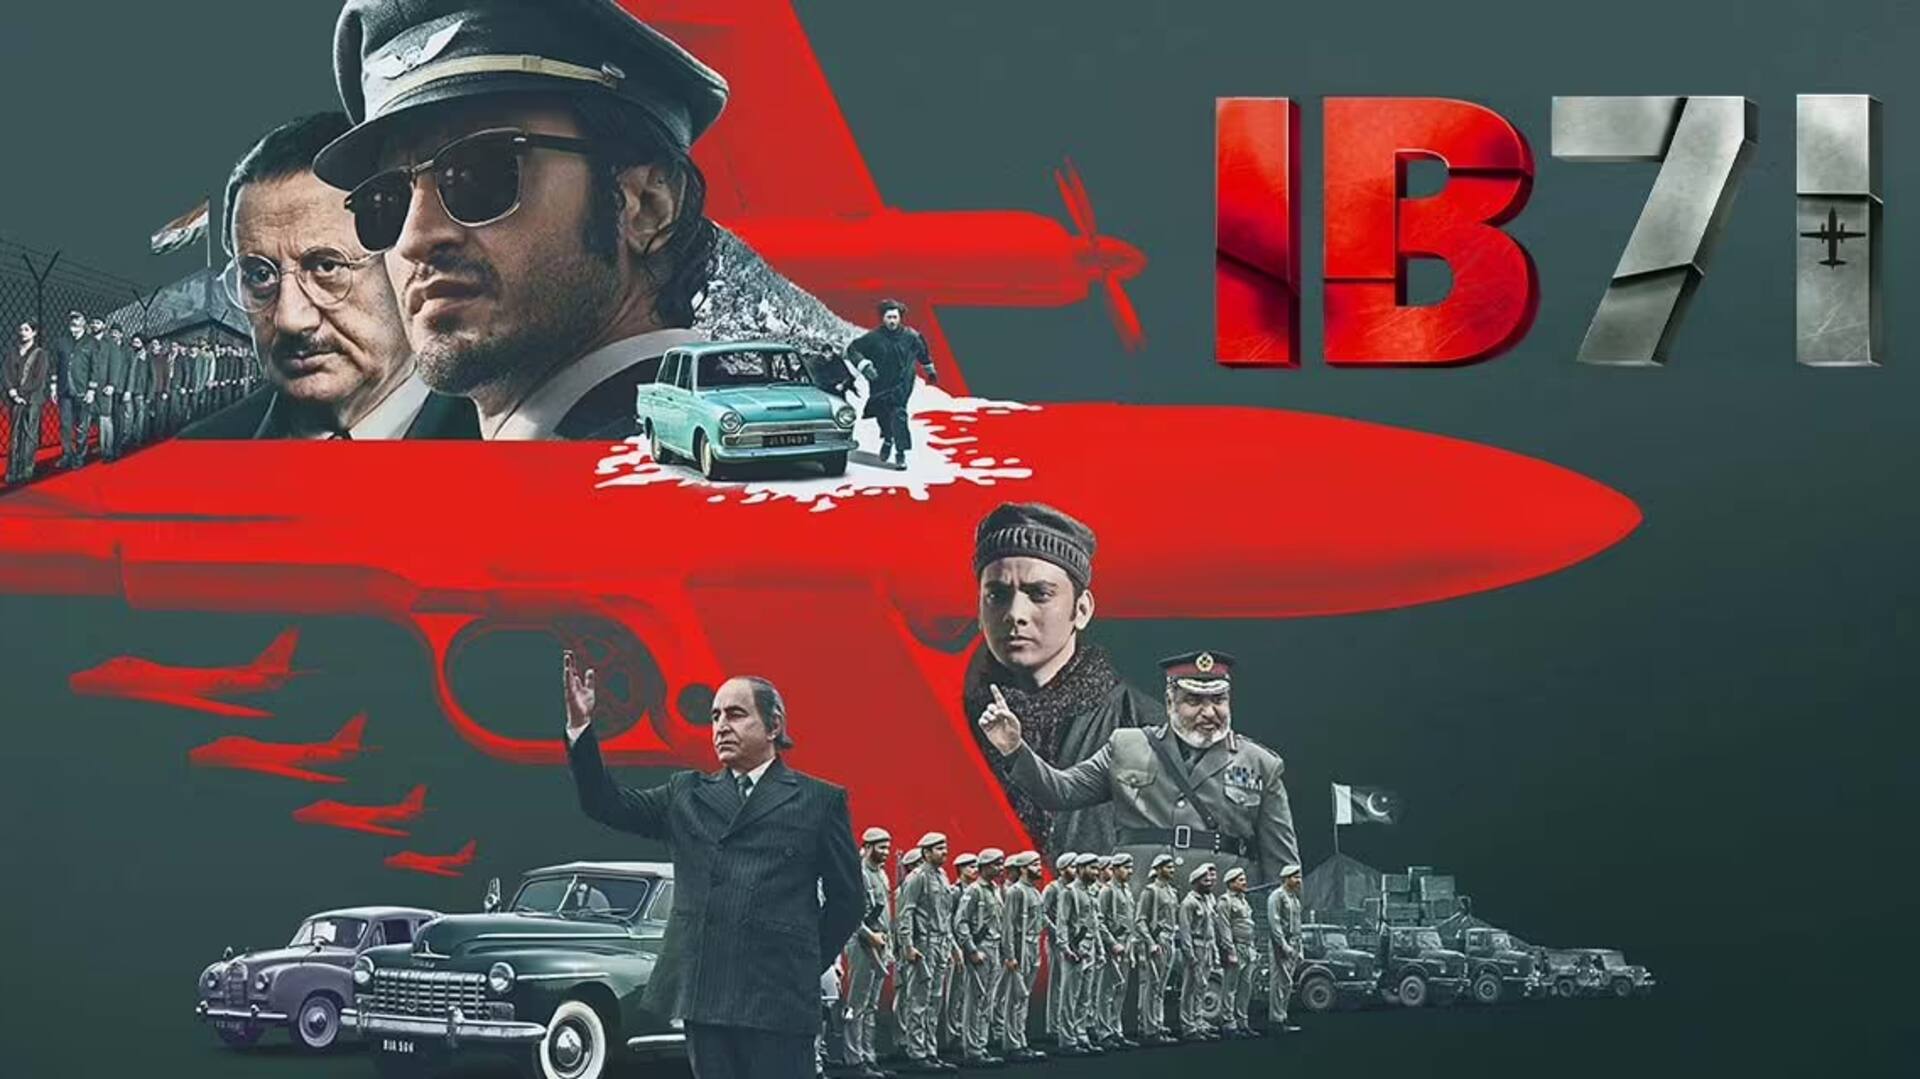 Box office: Vidyut Jammwal's 'IB71' gained momentum on Day 2